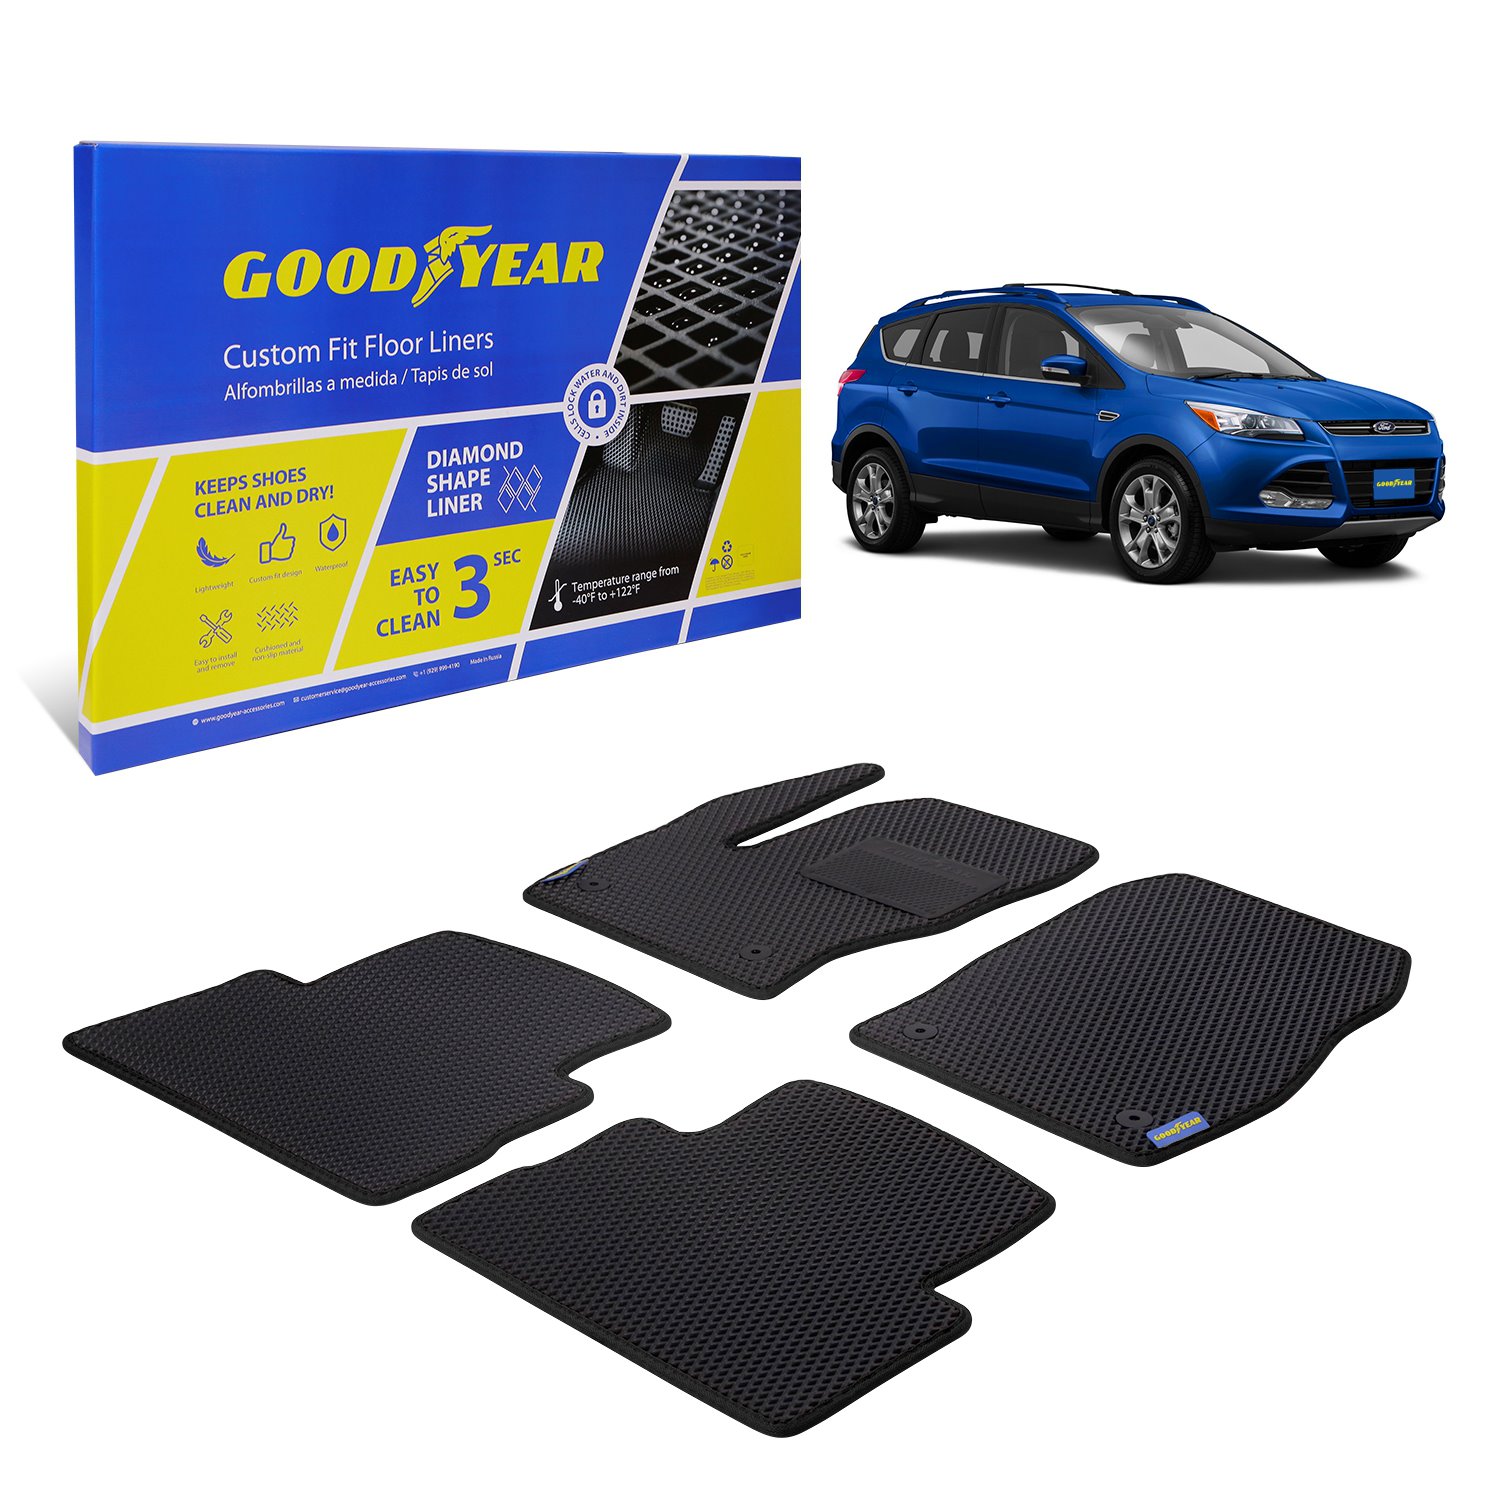 Goodyear Custom-Fit Floor Liners for 2013-2019 Ford Escape